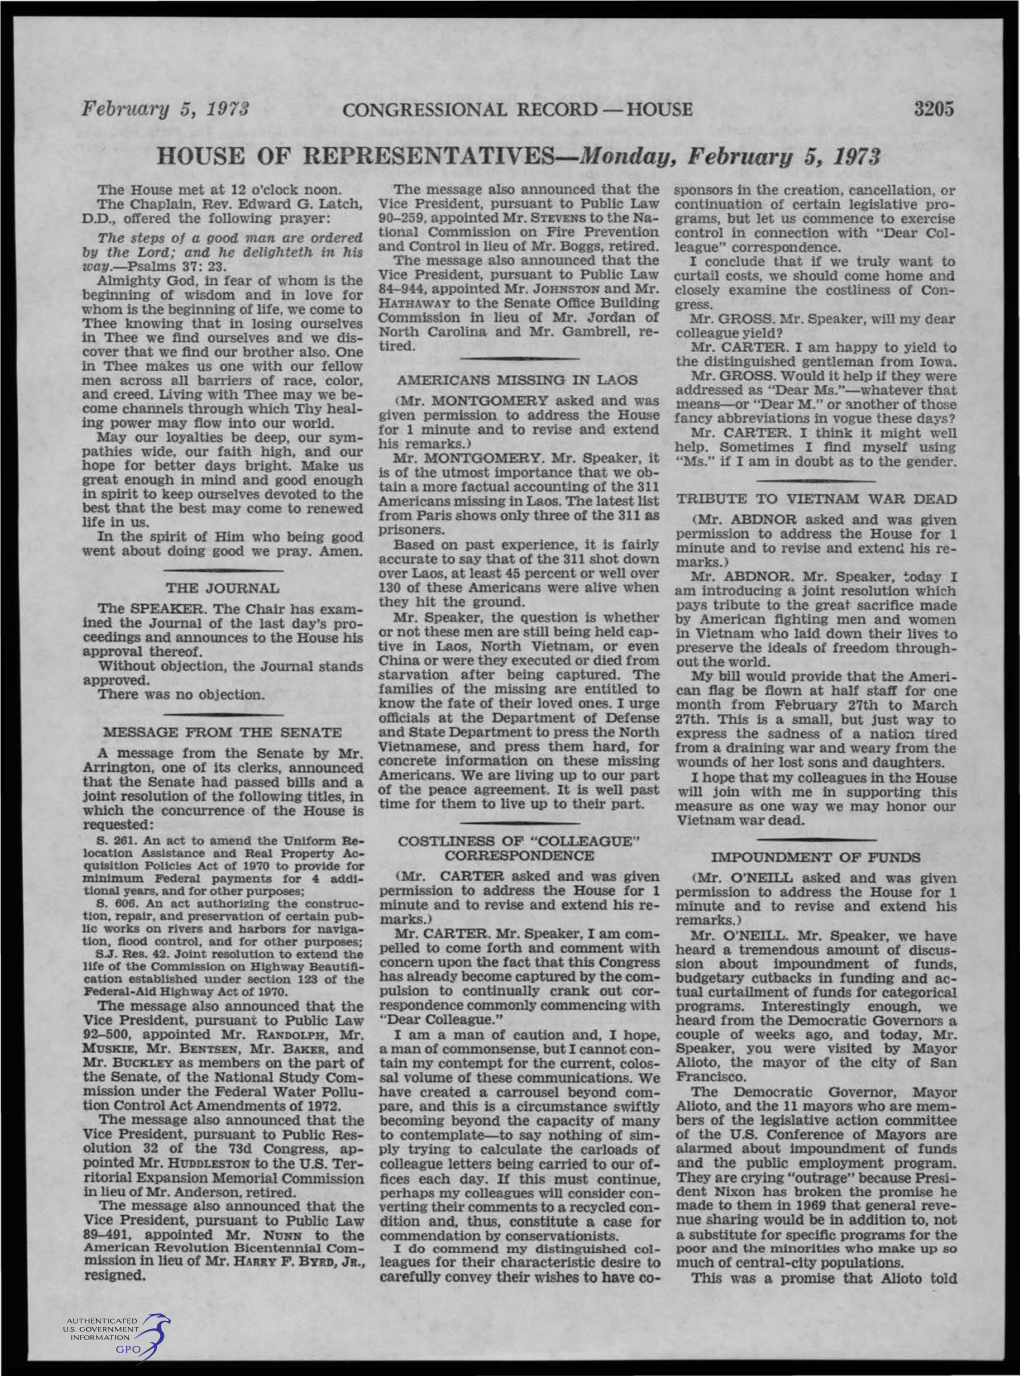 February 5, 1973 CONGRESSIONAL RECORD - HOUSE 3205 HOUSE of REPRESENTATIVES-Monday, February 5, 1973 the House Met at 12 O'clock Noon